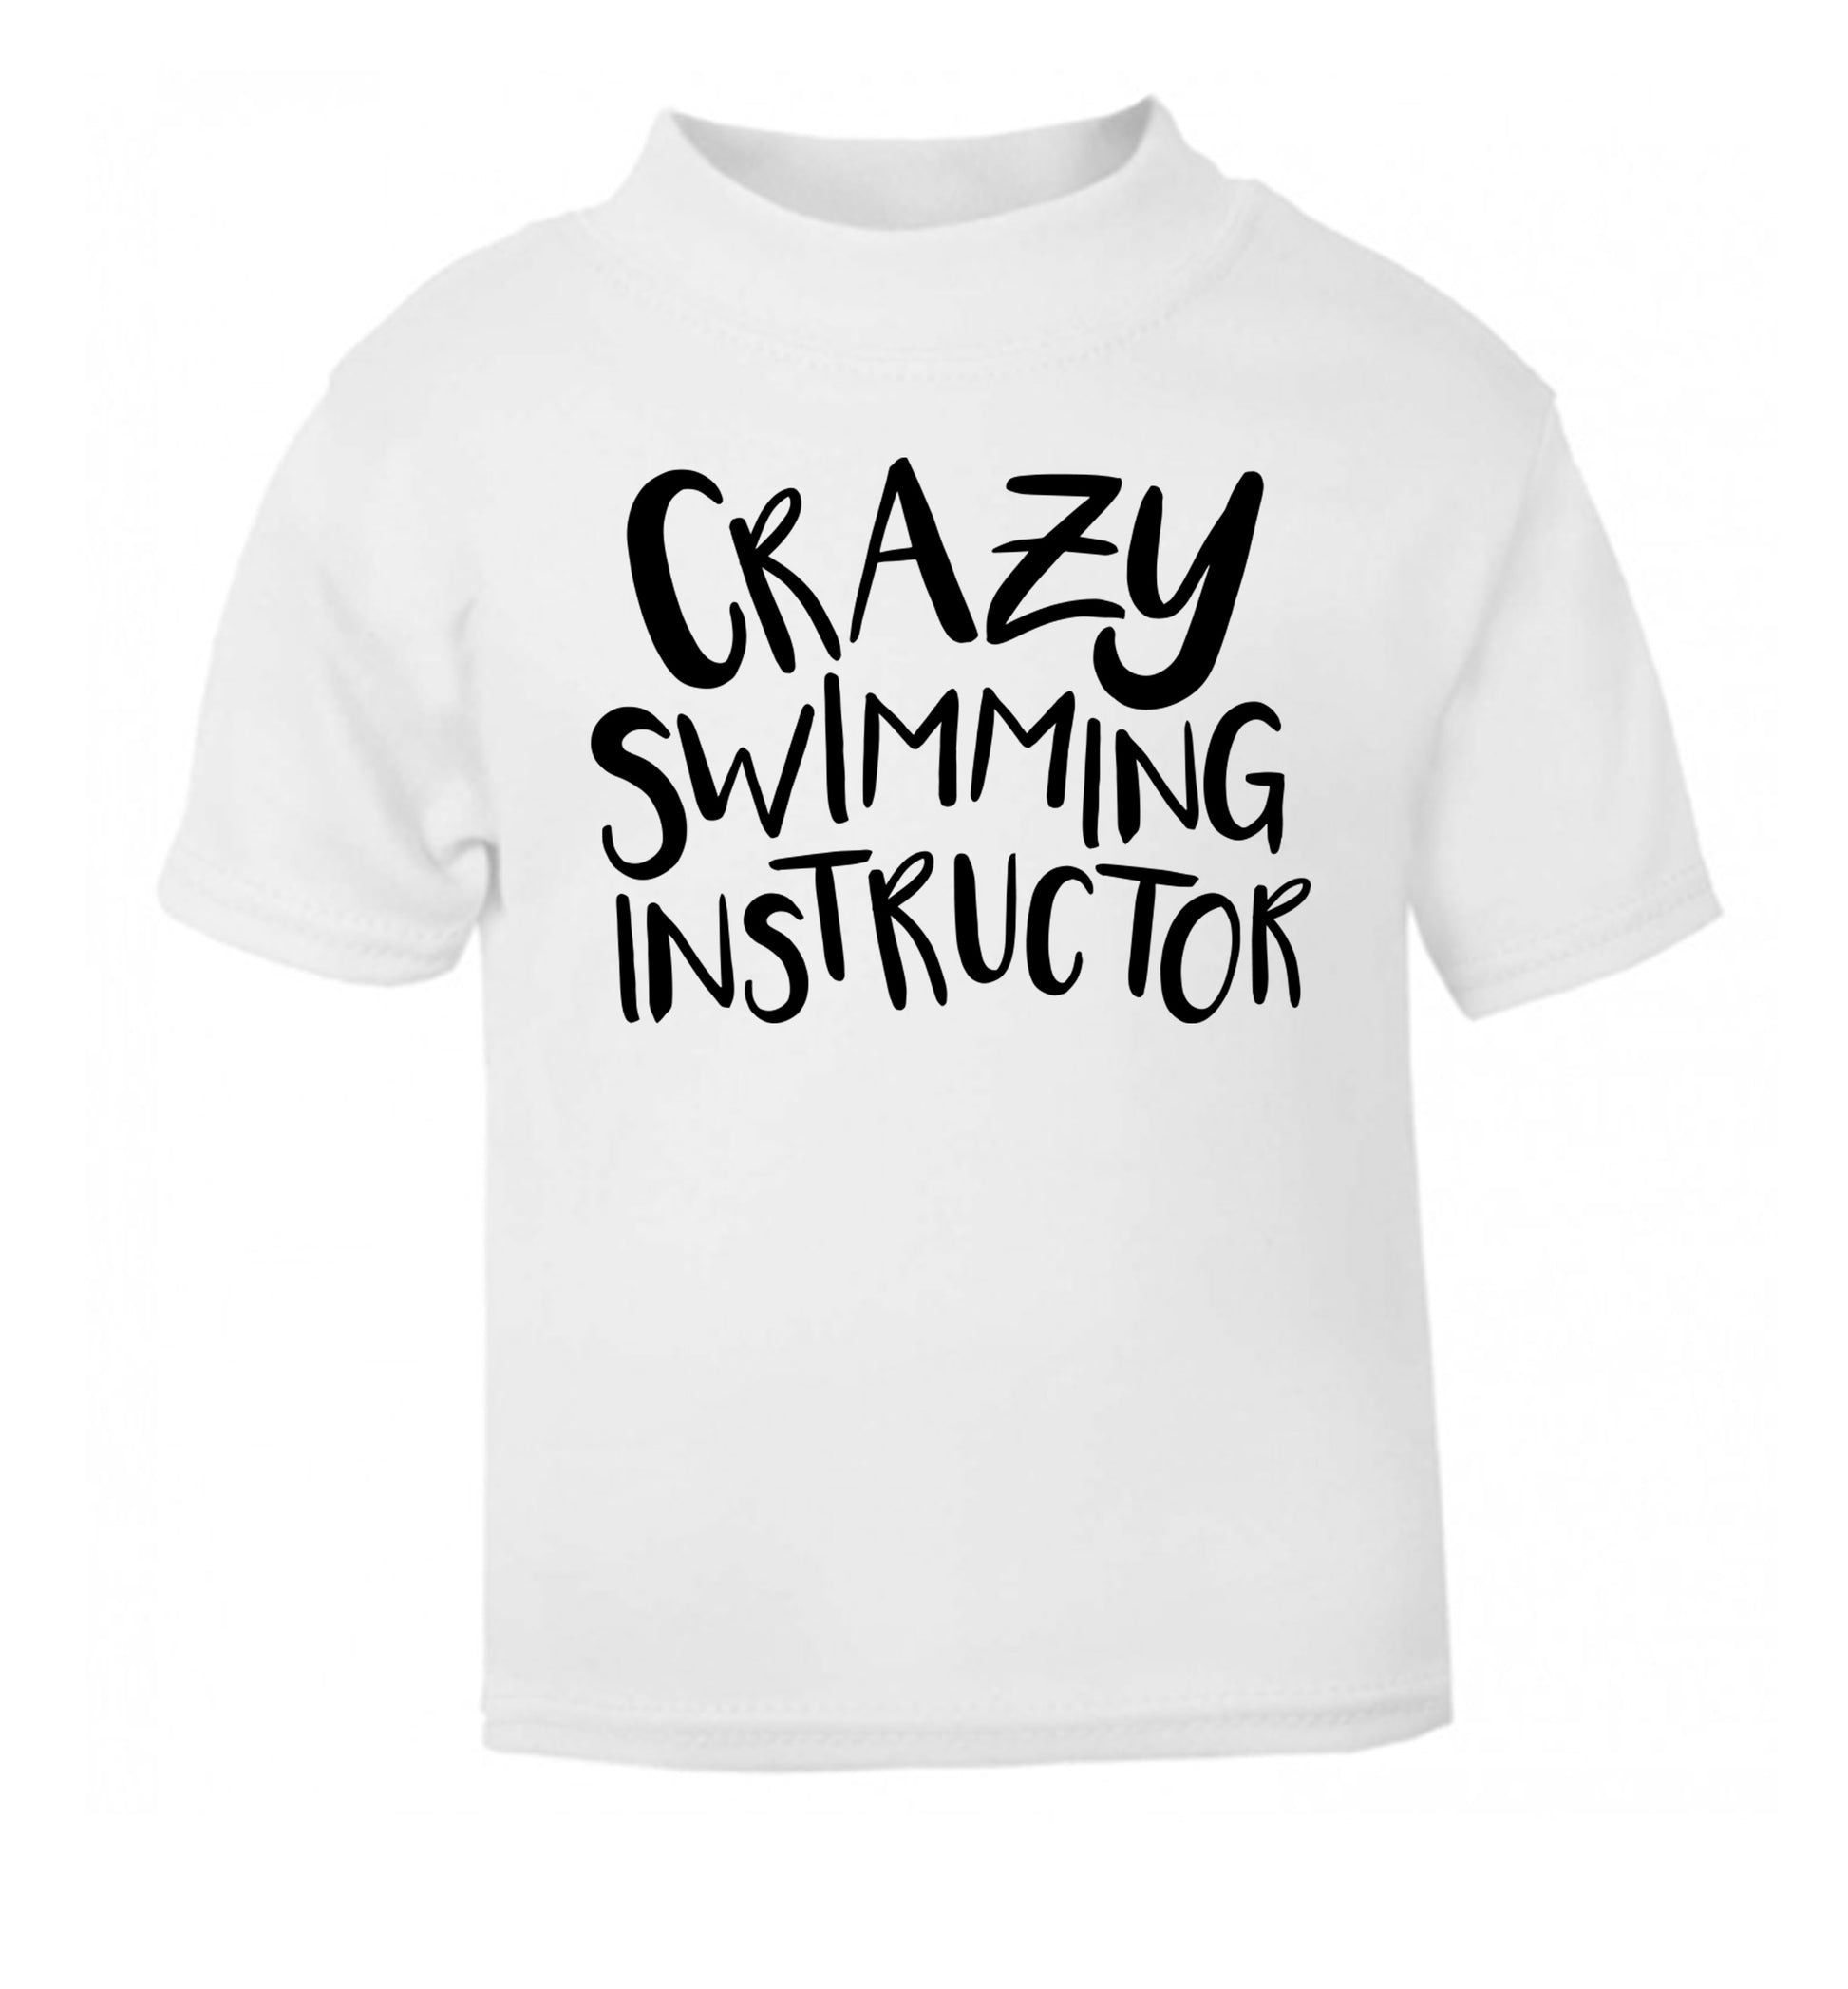 Crazy swimming instructor white Baby Toddler Tshirt 2 Years